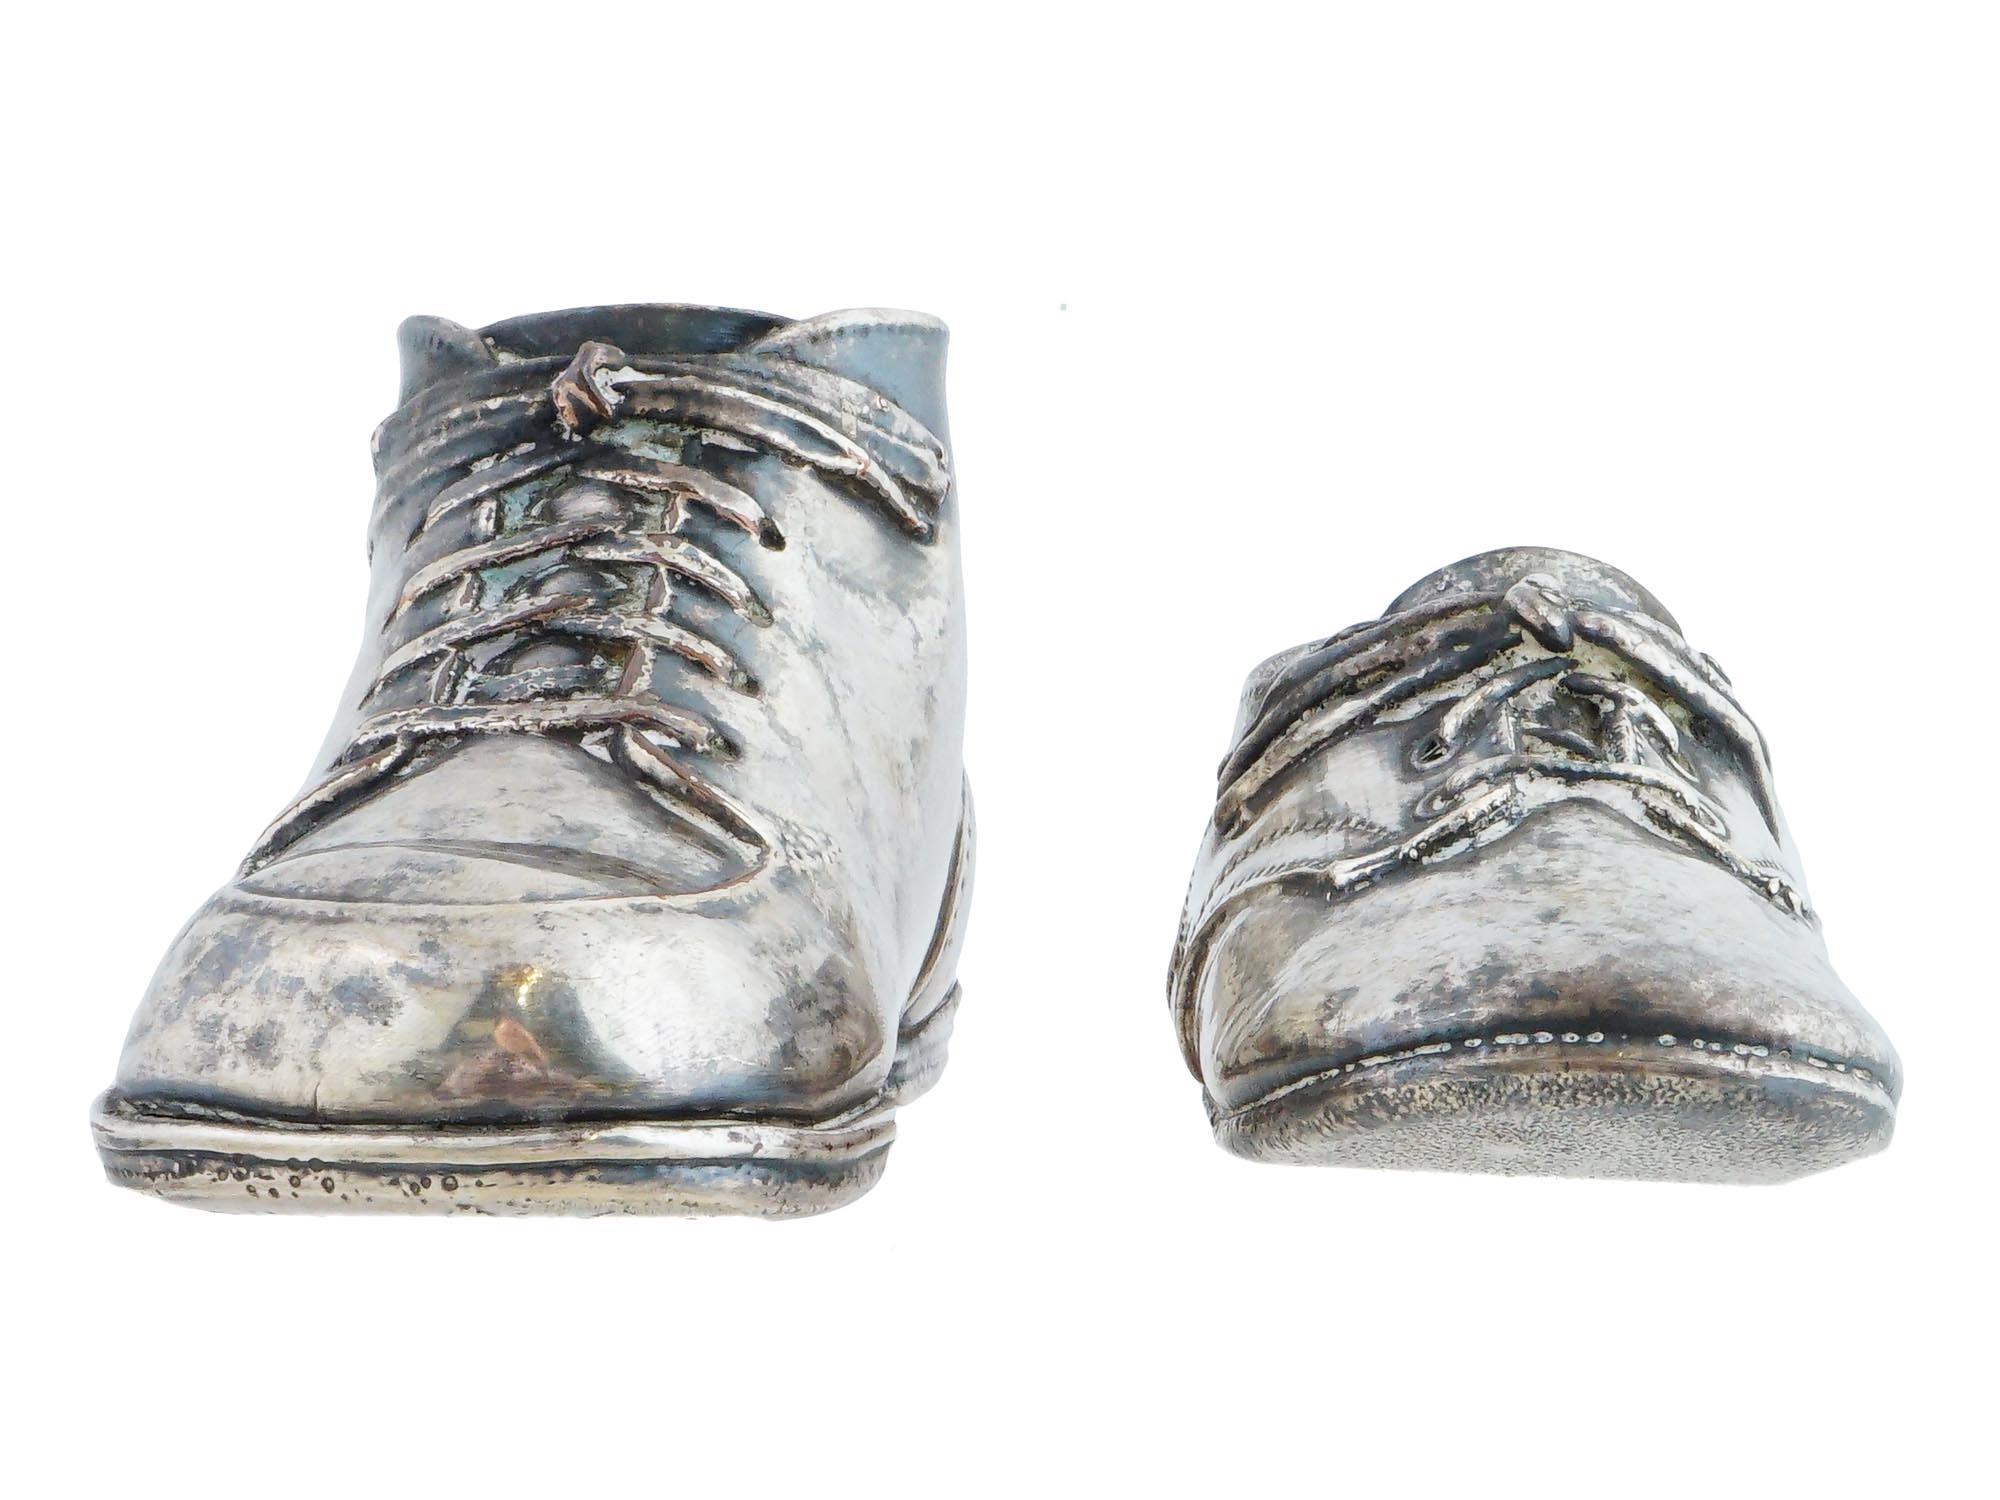 PAIR OF EUROPEAN SILVER PLATED BABY SHOES DESK DECOR PIC-2